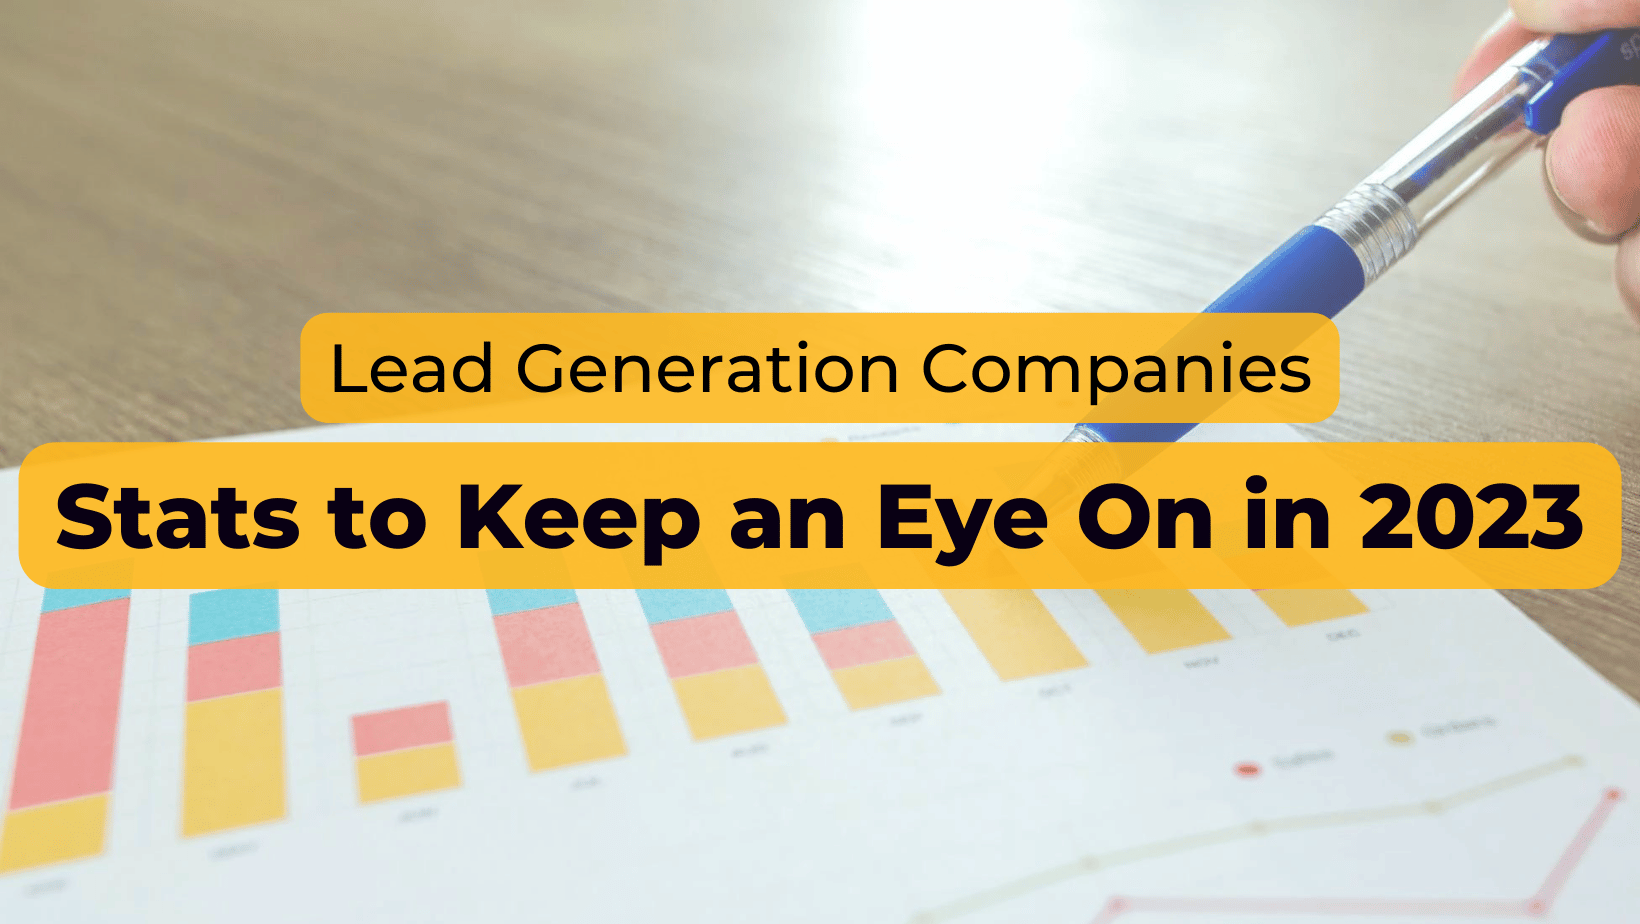 Lead Generation Companies: Stats to Keep an Eye On in 2023